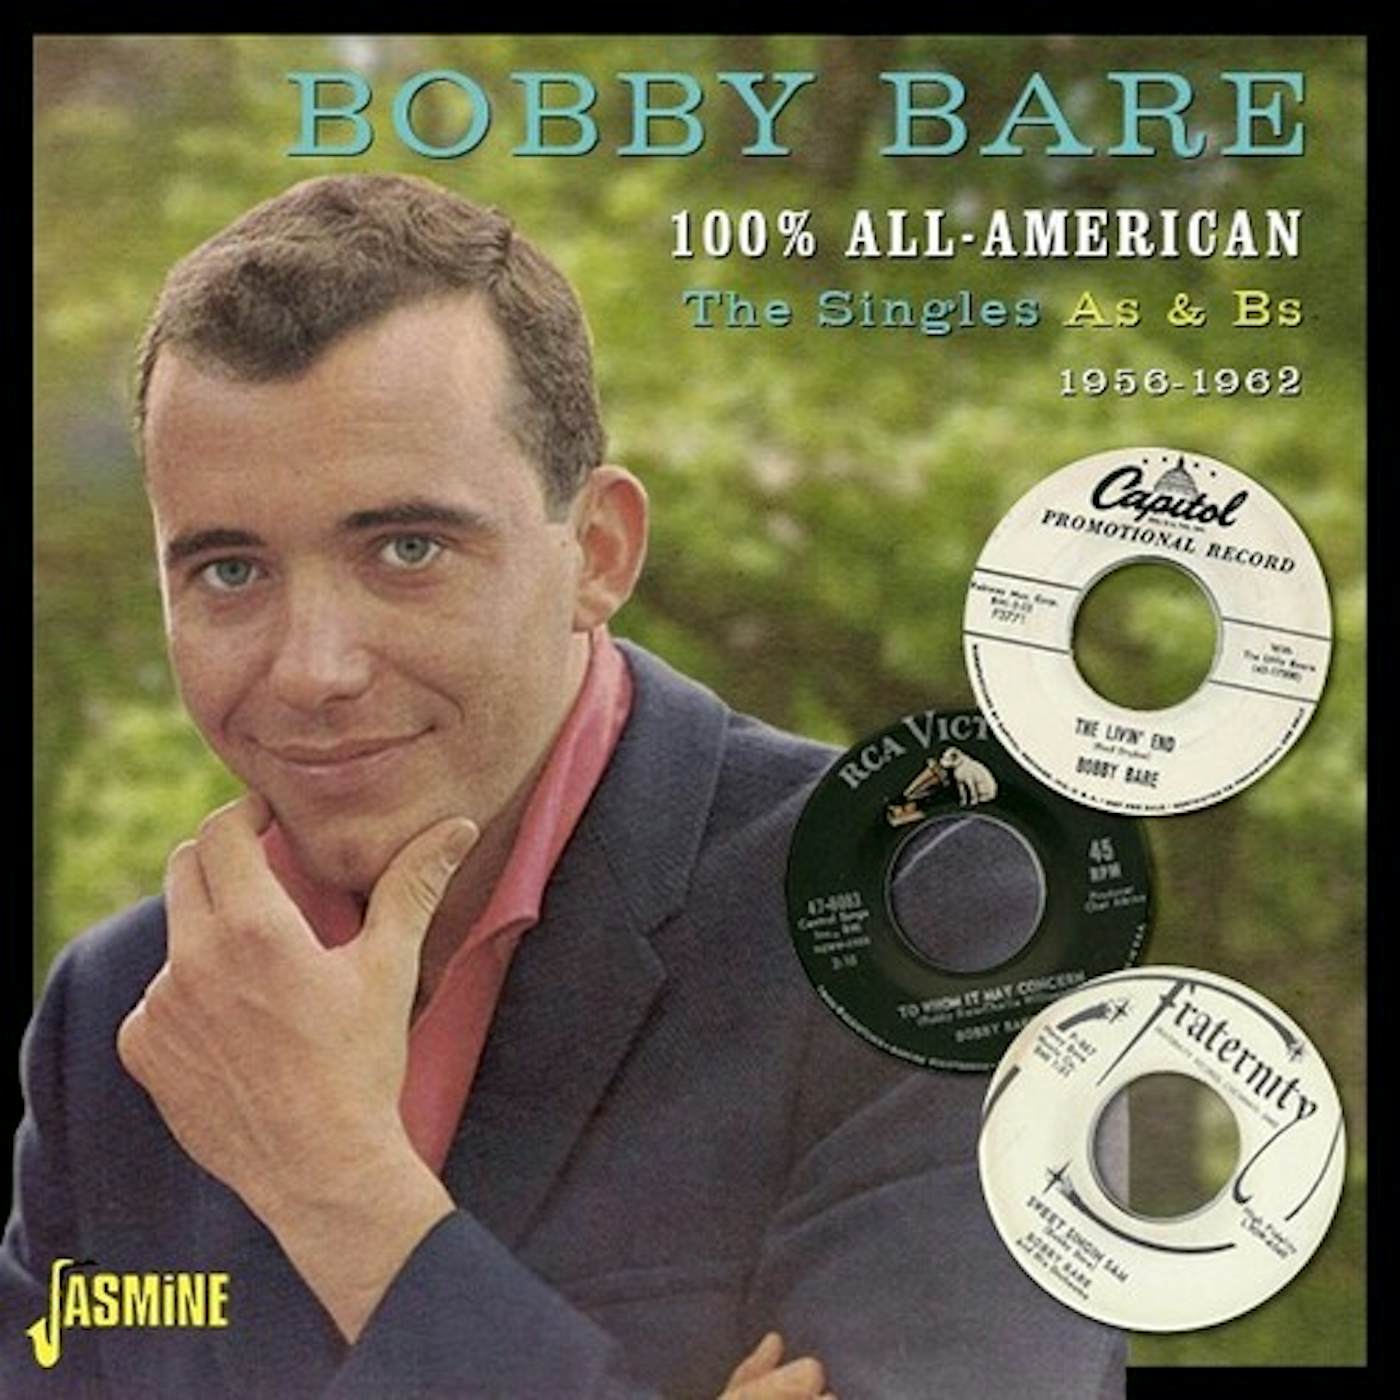 Bobby Bare 100% All American: The Singles As & Bs 1956-1962 CD